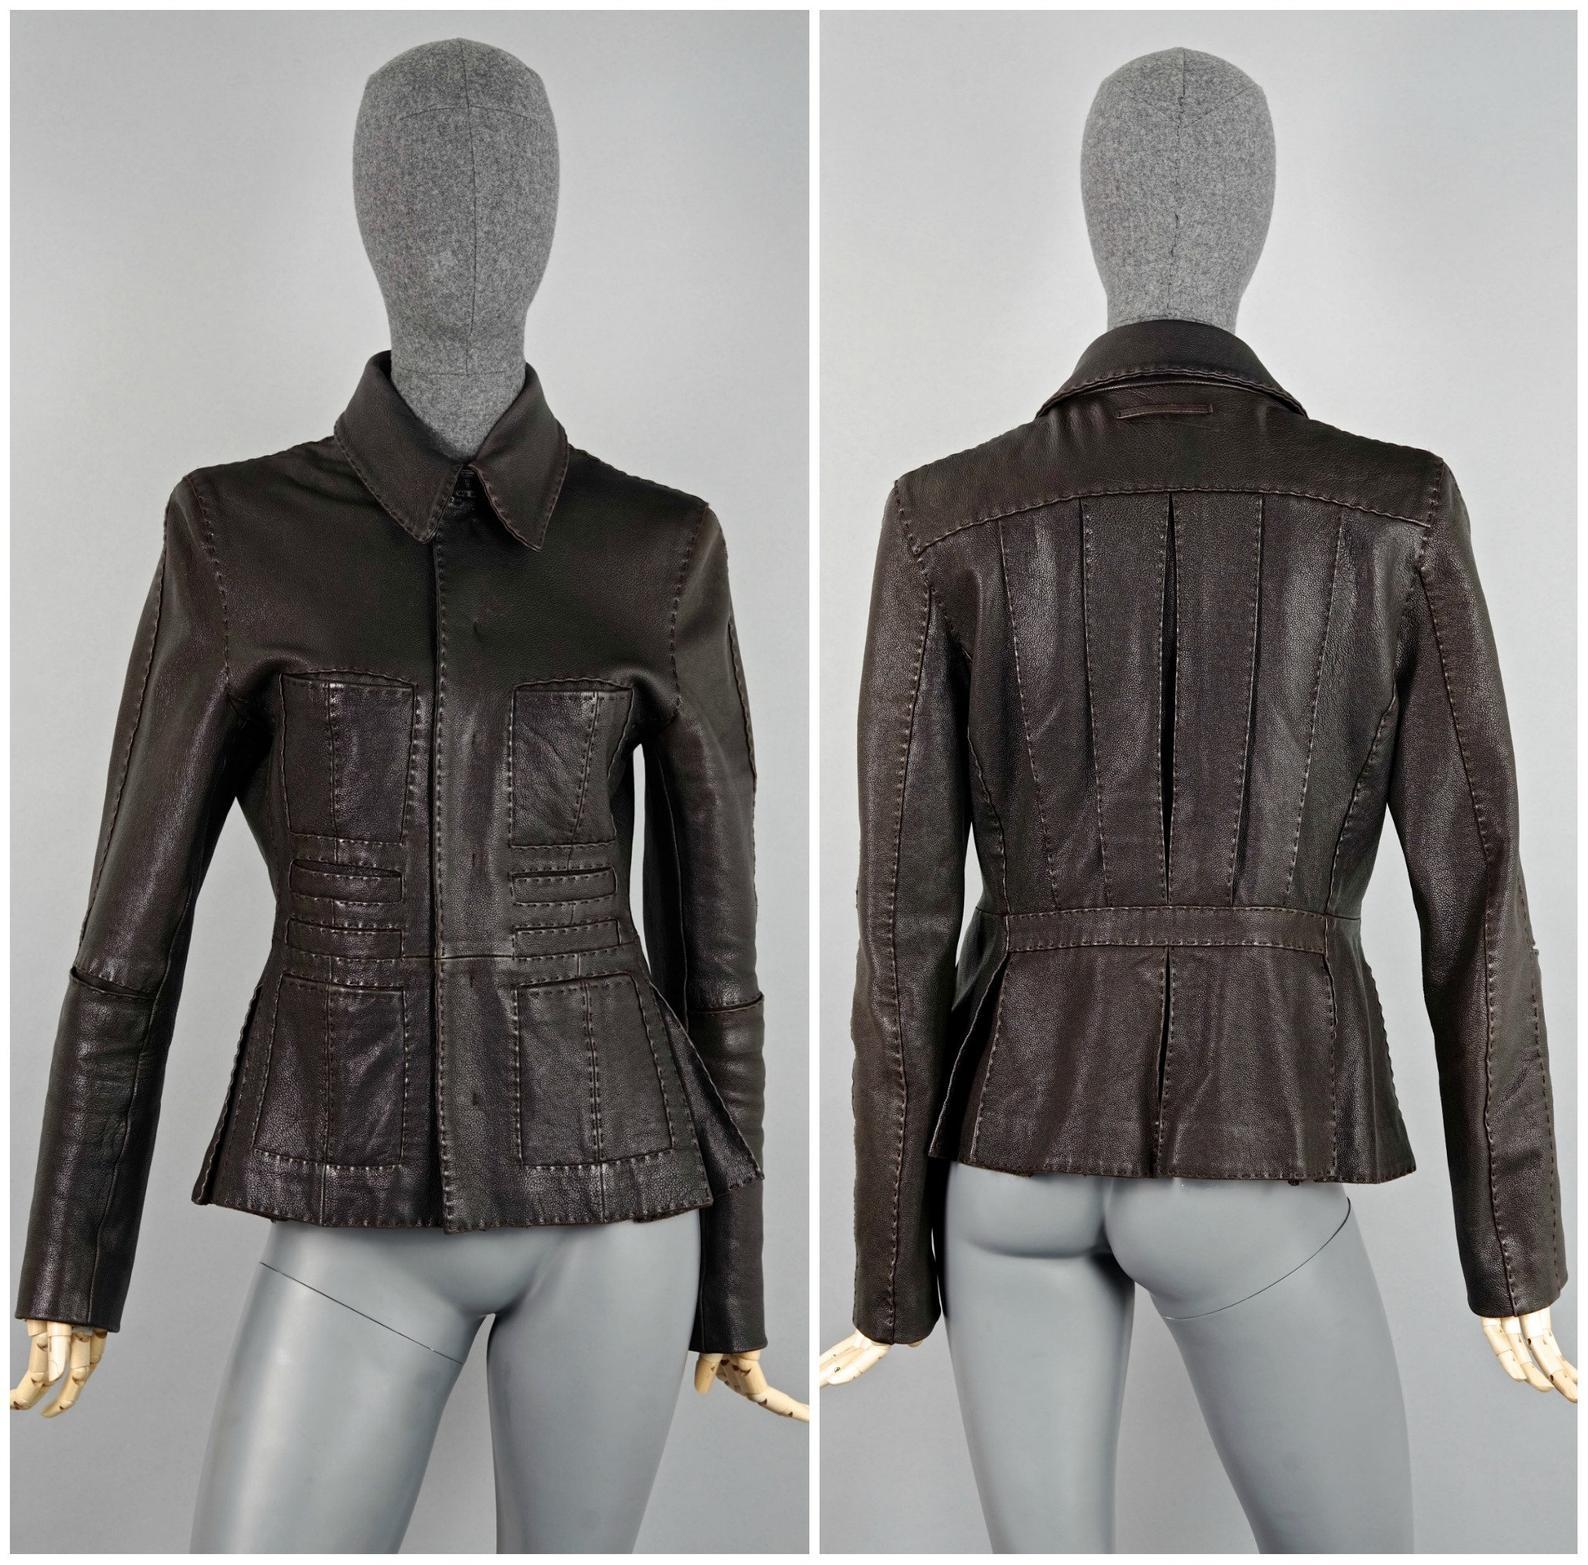 Vintage JEAN PAUL GAULTIER Multiple Pocket Pleated Dark Brown Leather Jacket

Measurements taken laid flat, please double bust and waist:
Shoulder: 16.14 inches (41 cm)
Sleeves: 24.21 inches (61.5 cm)
Bust: 16.92 inches (43 cm)
Waist: 15.31 inches